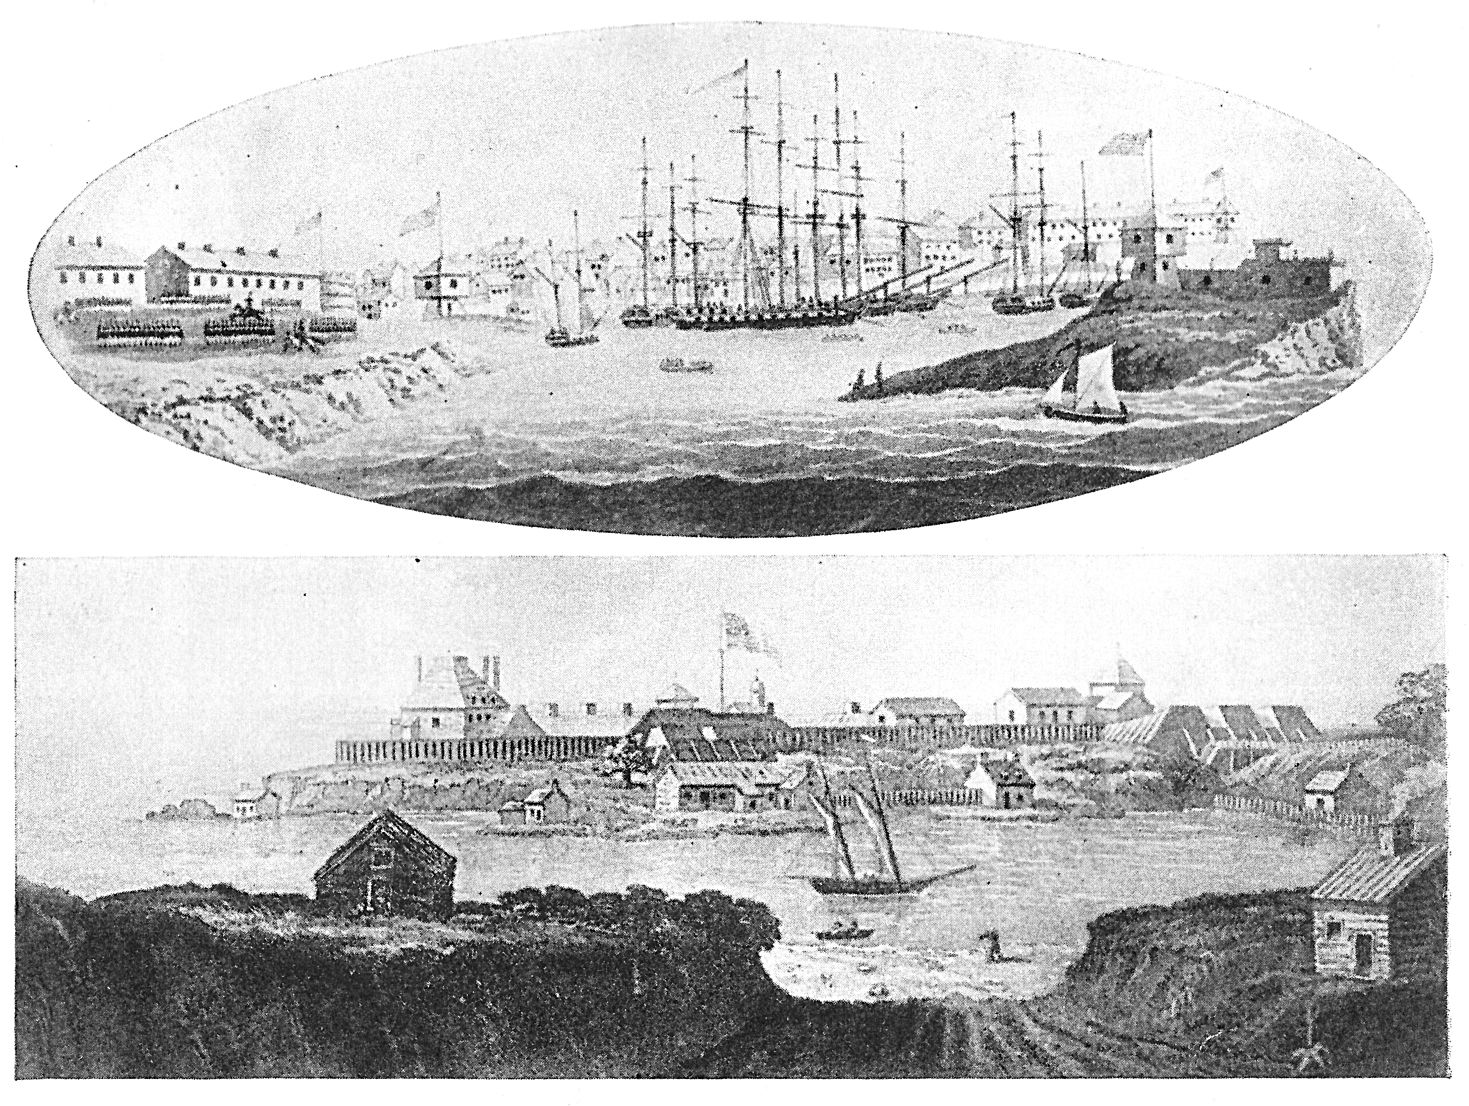 [Sackett's Harbour and Fort Niagara in 1813]